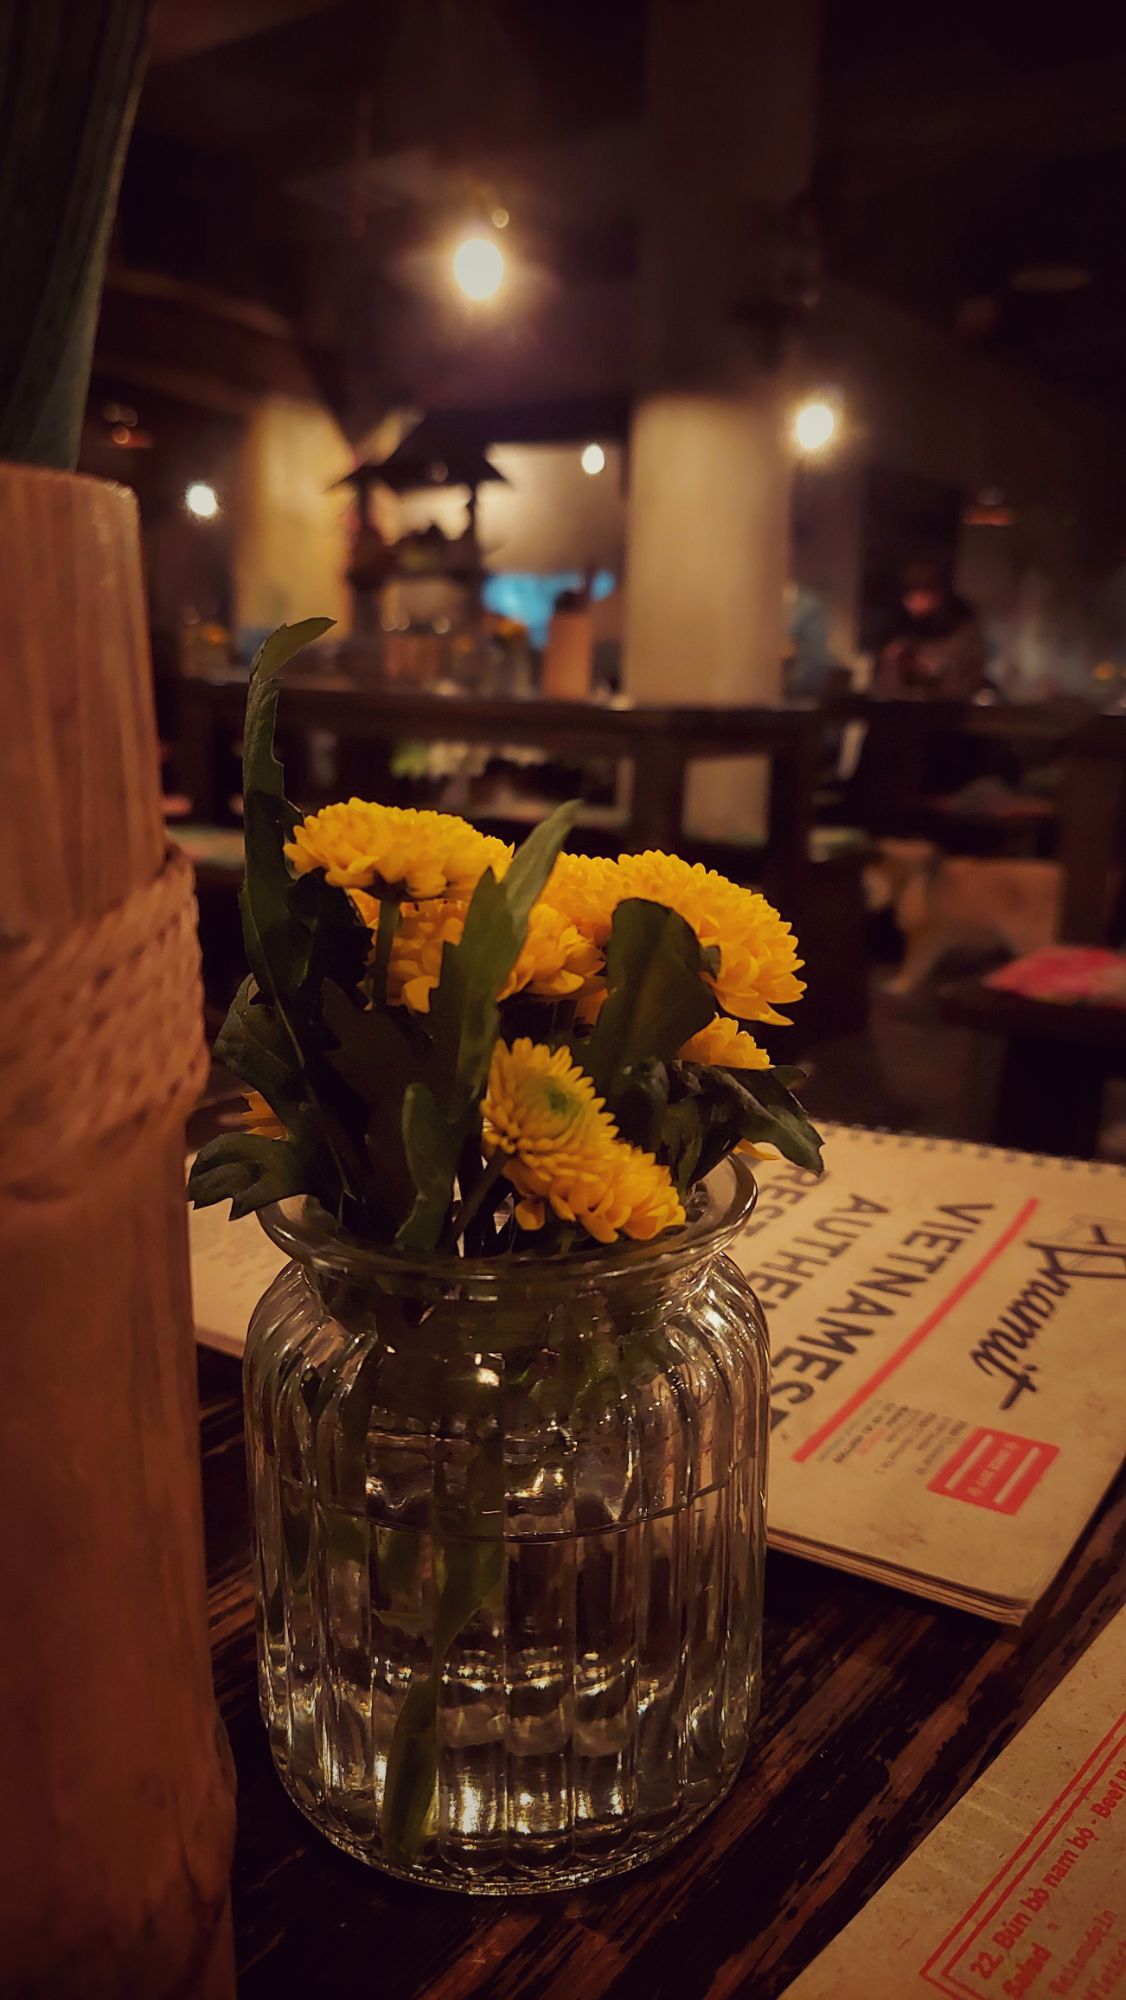 Table decoration in a restaurant: Flowers, a wooden vessel containing spoons, and a menu